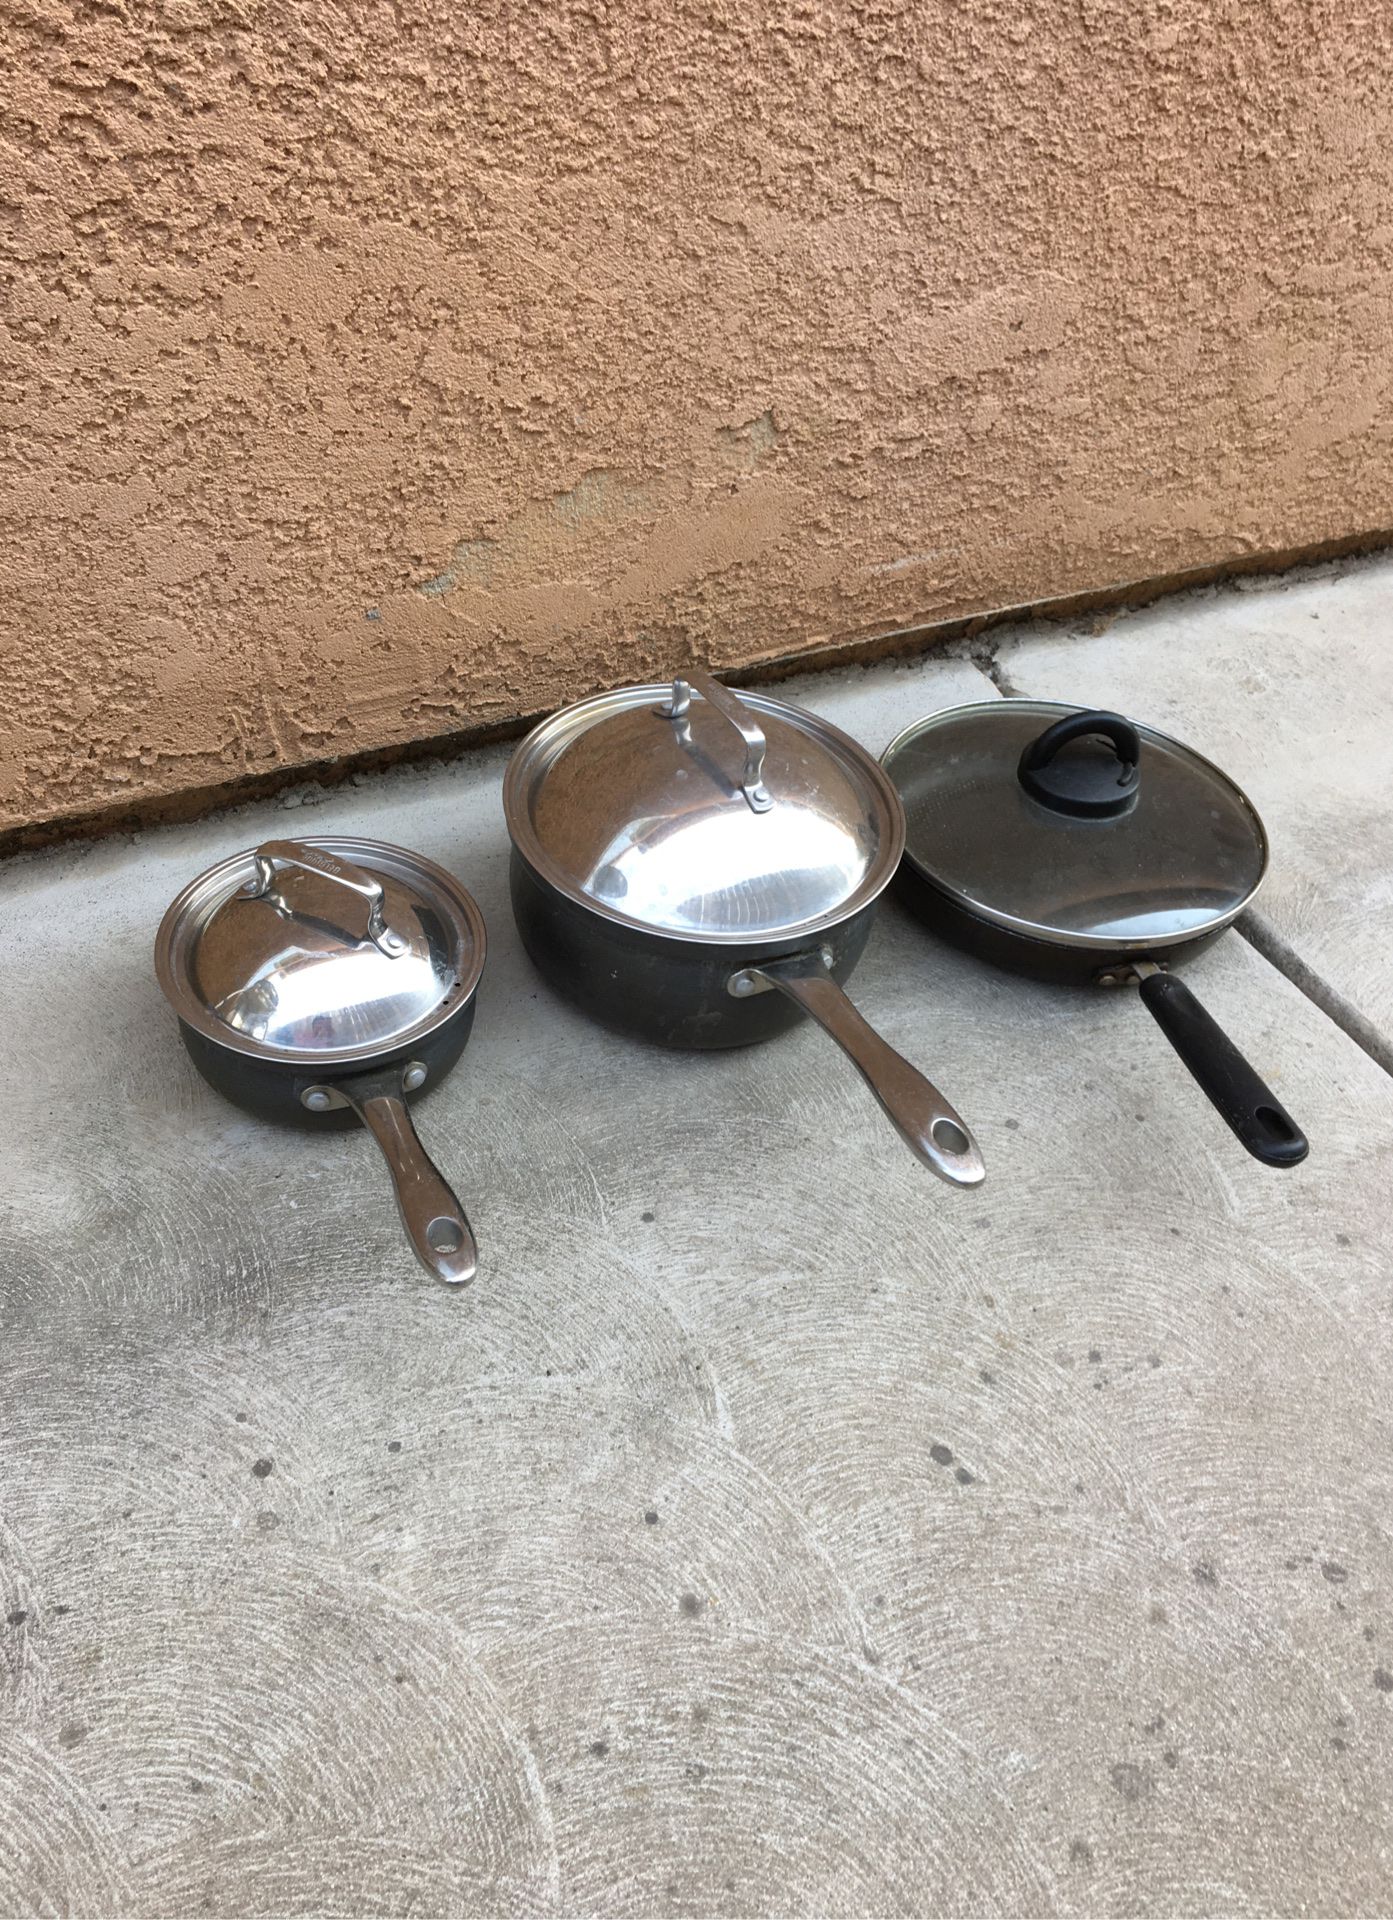 The cookware in good condition